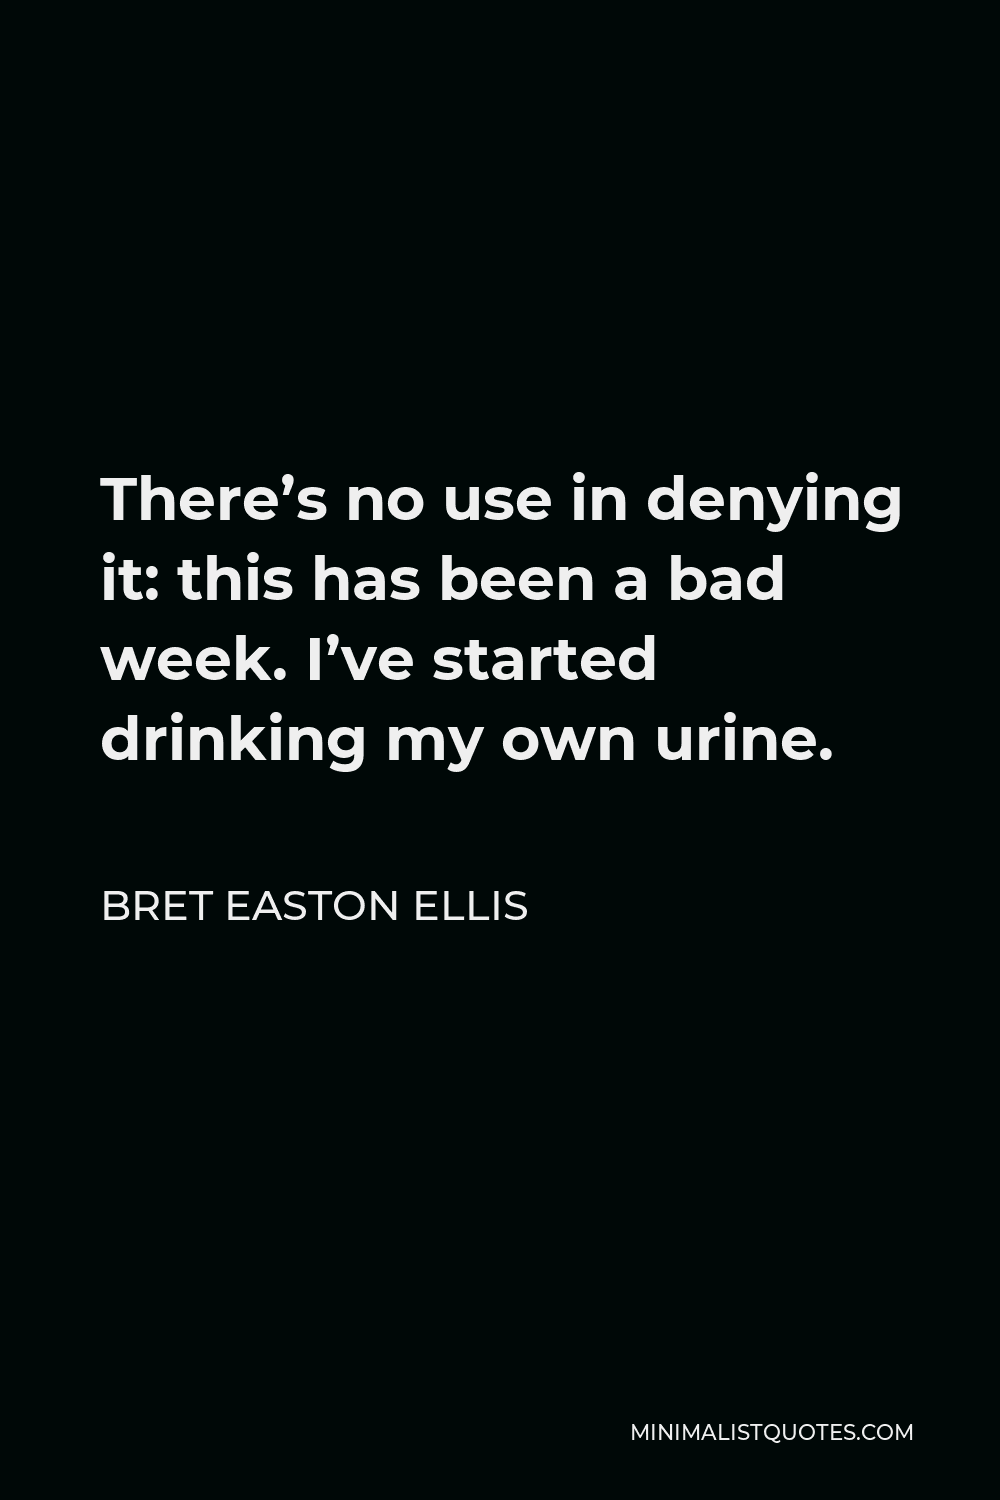 Bret Easton Ellis Quote - There’s no use in denying it: this has been a bad week. I’ve started drinking my own urine.